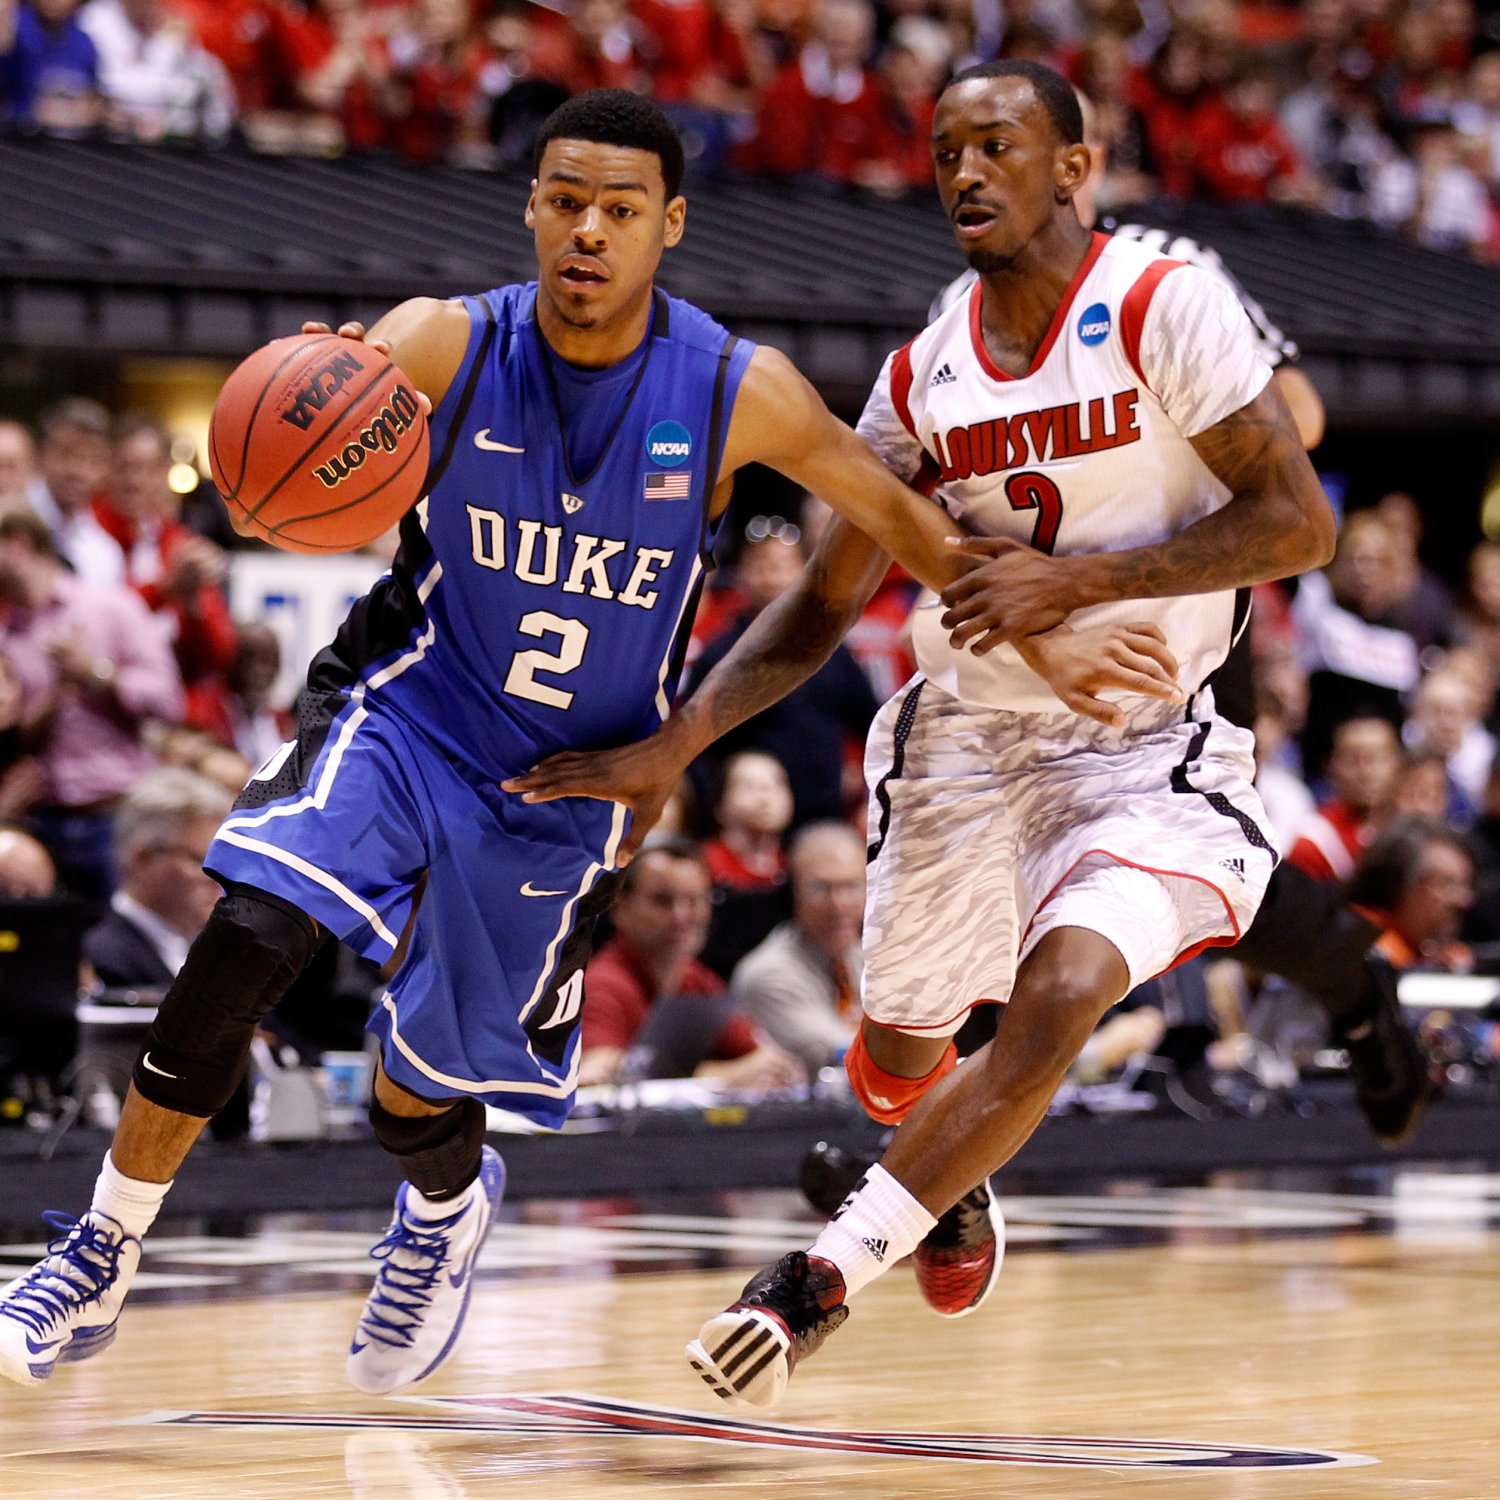 Duke Basketball: 5 Things We Learned in the Loss to Louisville | Bleacher Report